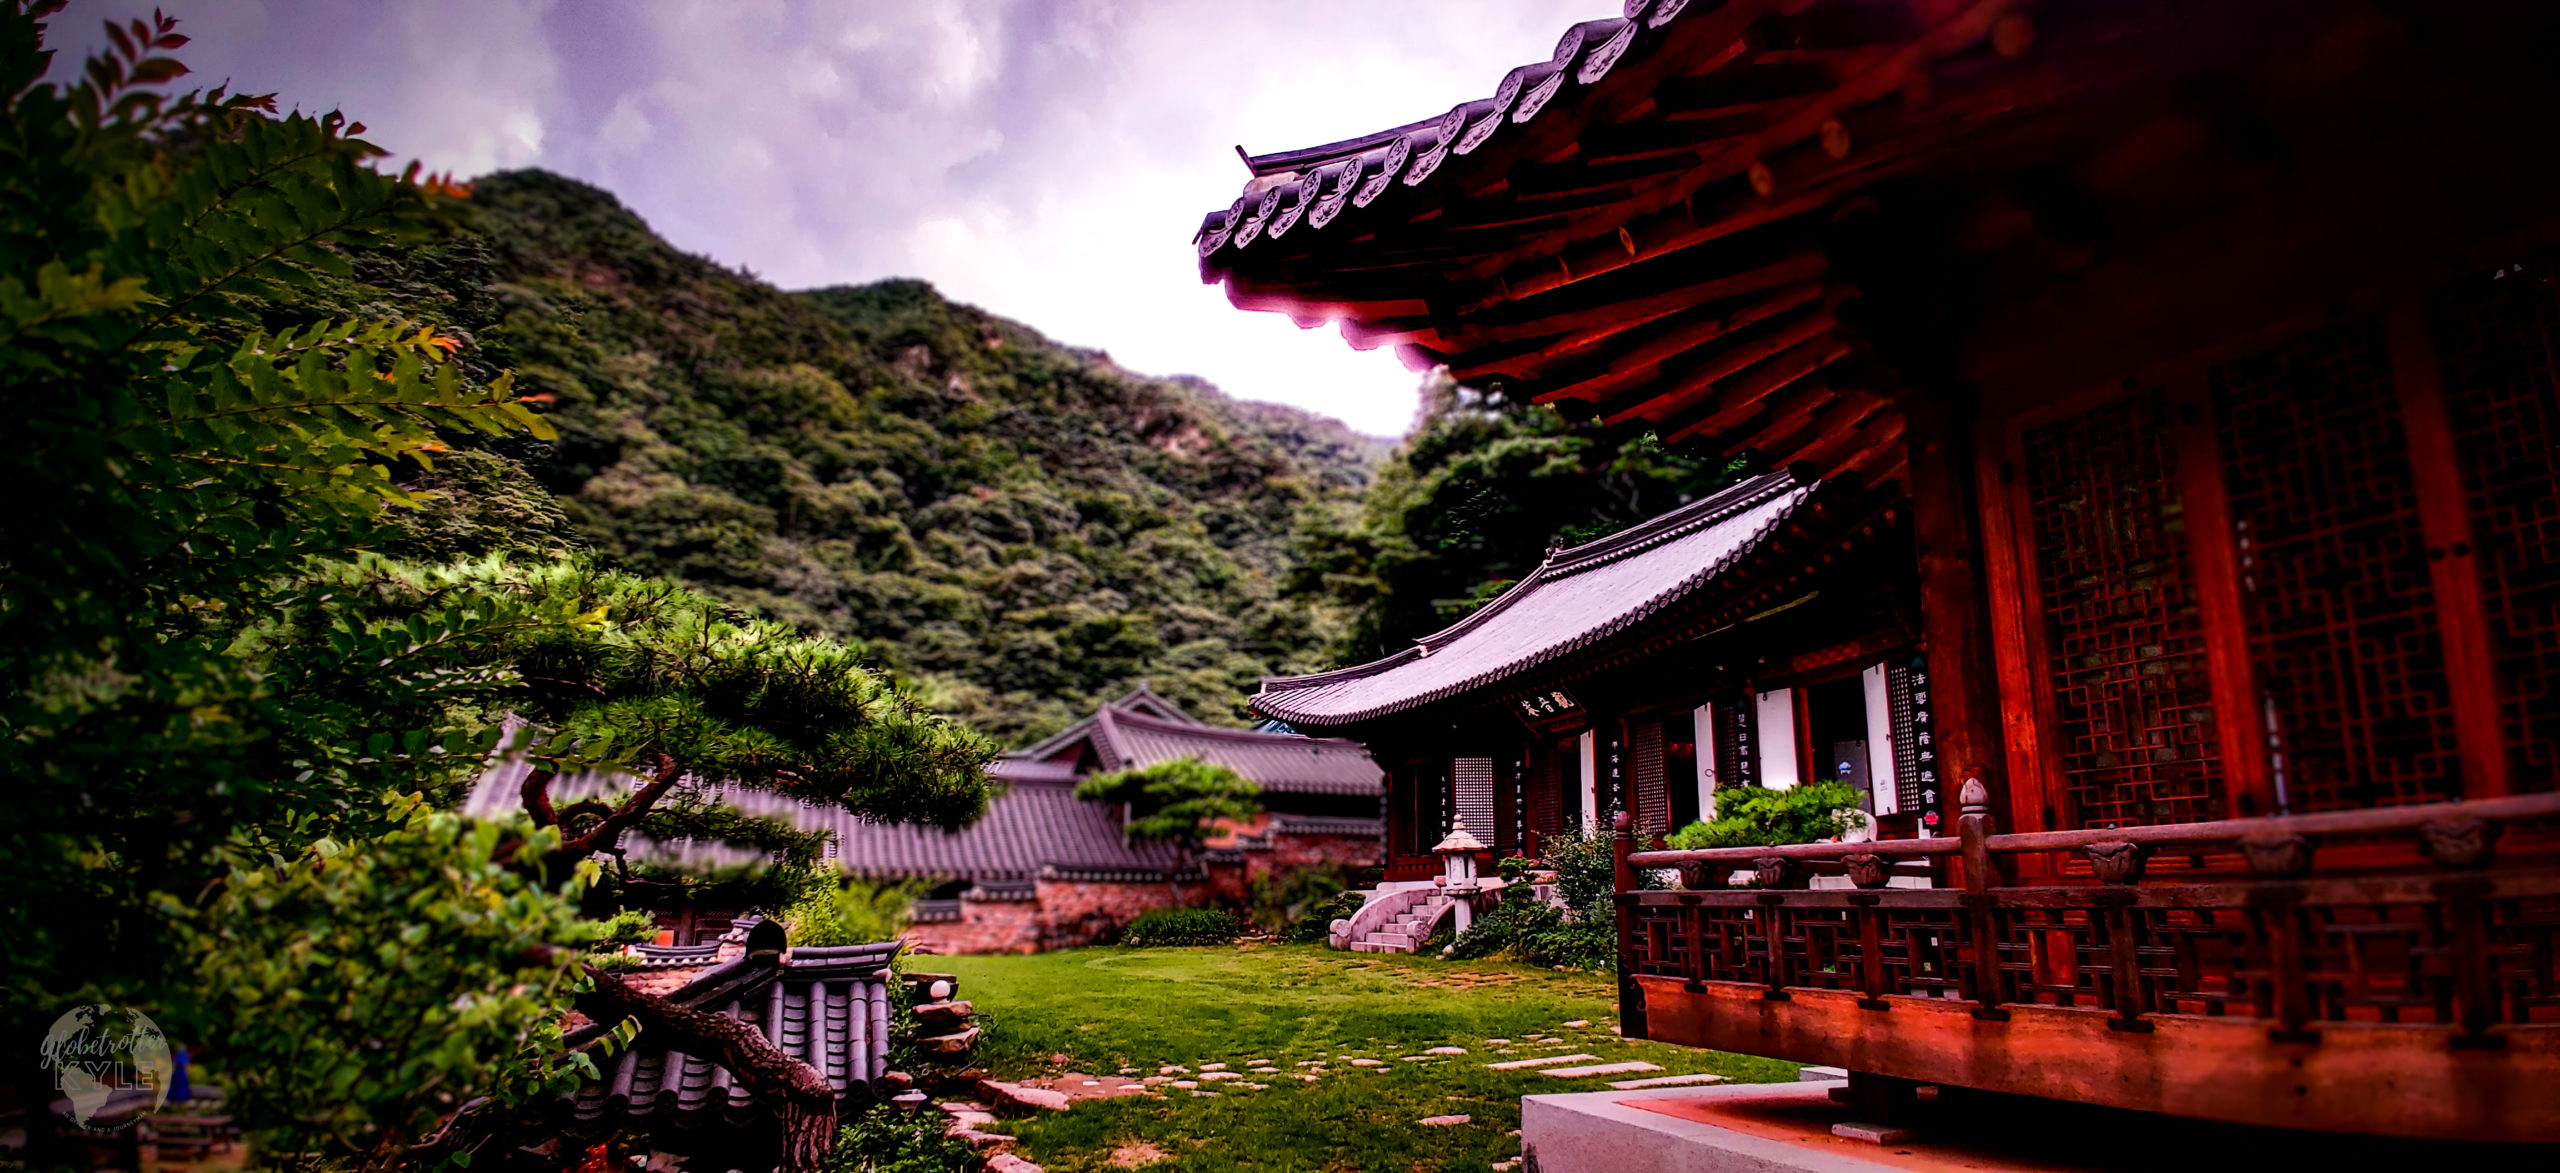 a dark and stormy sky sits behind a wooden buddhist temple in a mountain valley of south korea's mountains